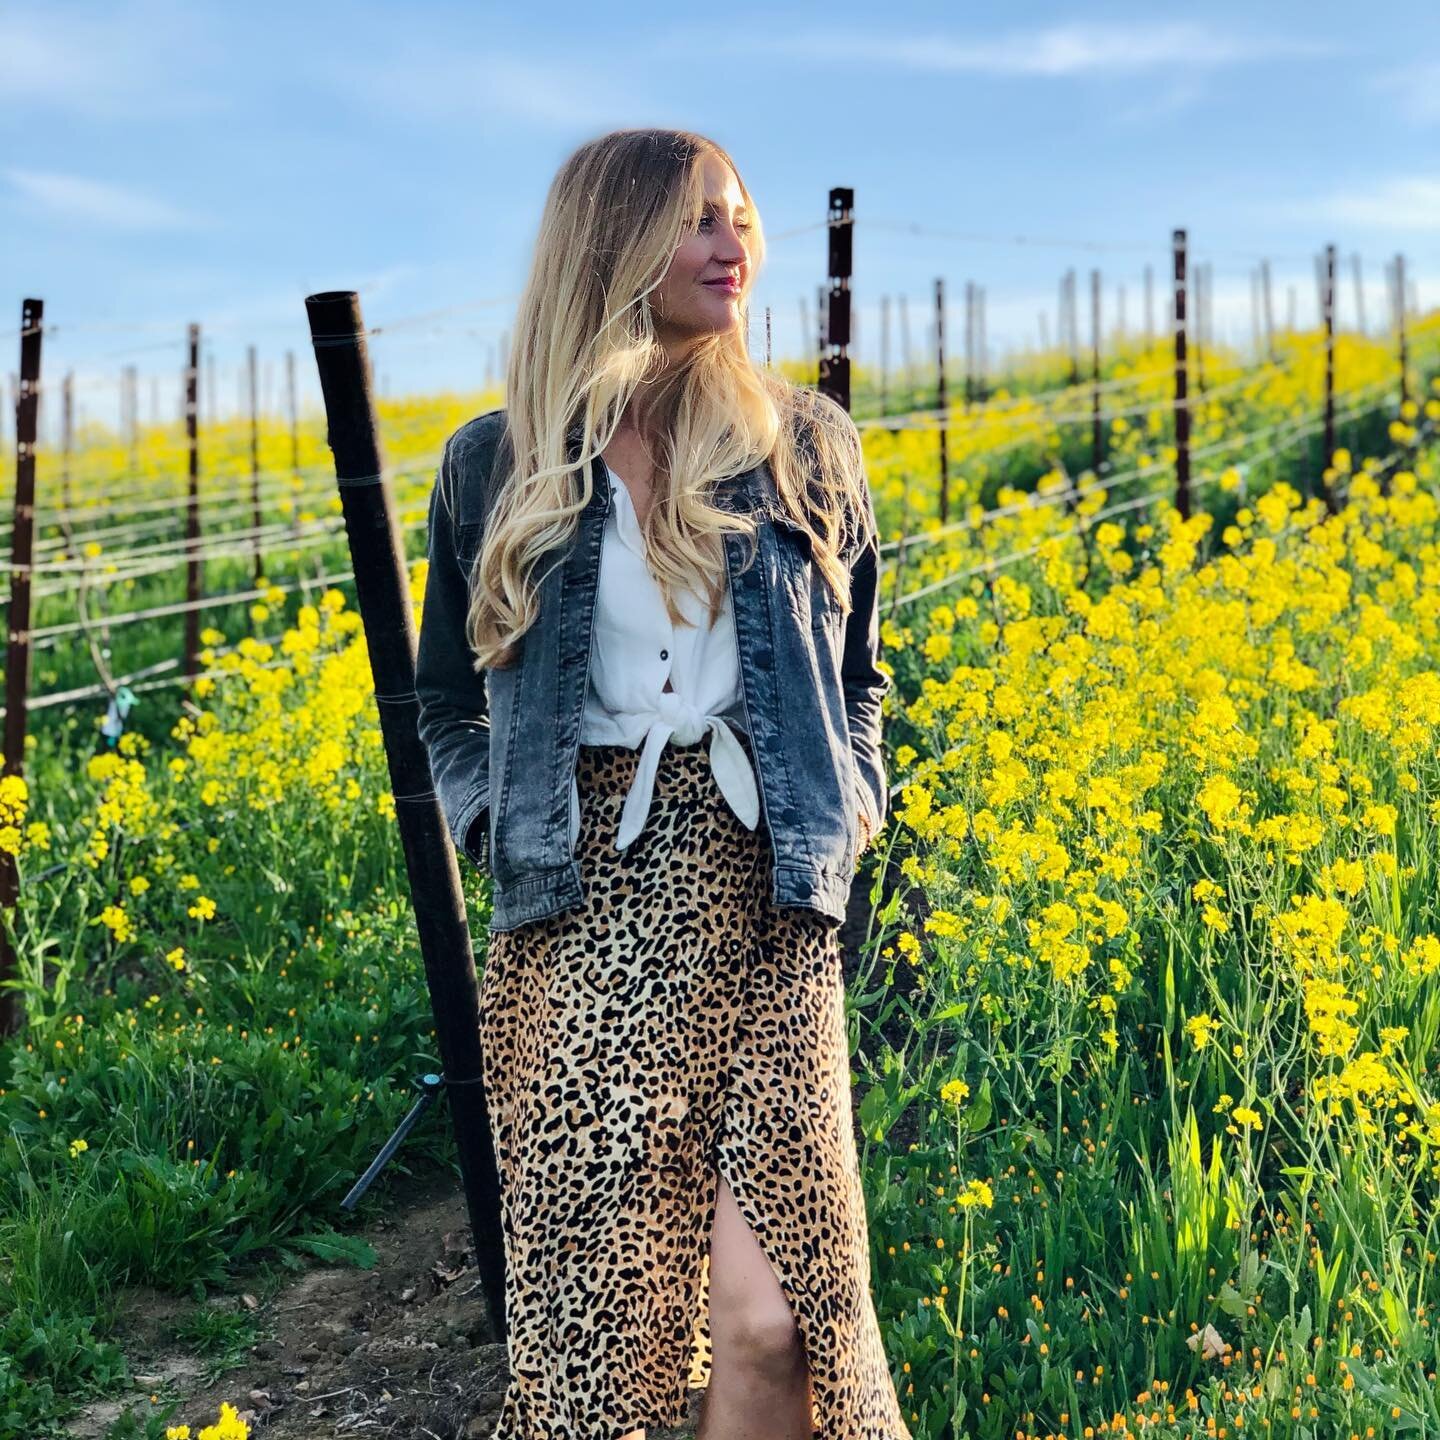 Soaking in every last droplet of sunlight from our fun-filled escape. Thank you my love for planning our first overnight away from the kids since our daughter was born. 

Spring time is my favorite season to visit wine country. The sun kissed hue of 